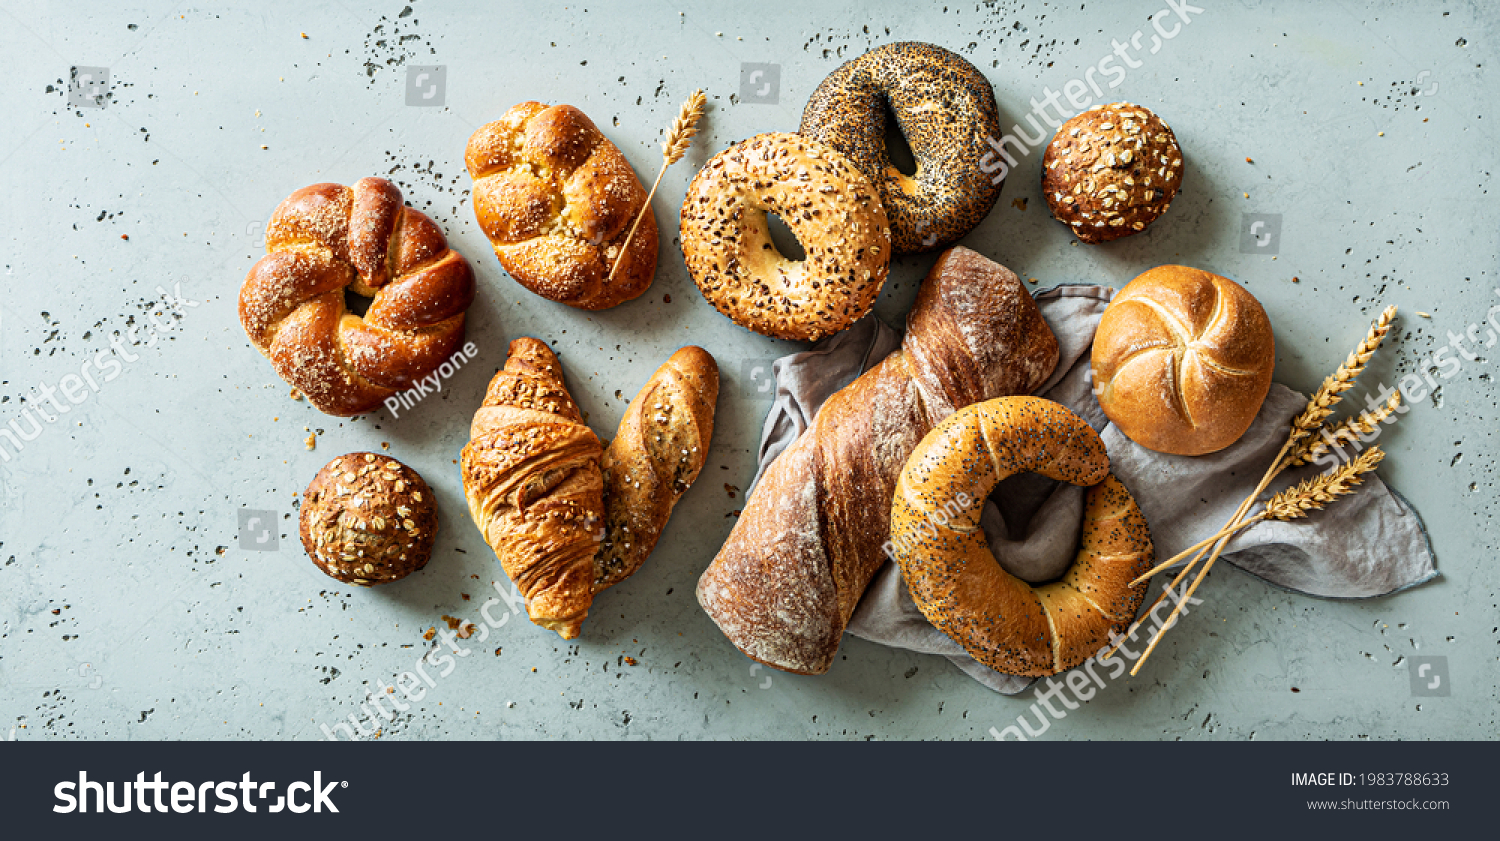 Bakery - various kinds of breadstuff. Bread rolls, bagel, sweet bun and croissant captured from above (top view, flat lay). Grey stone background. #1983788633